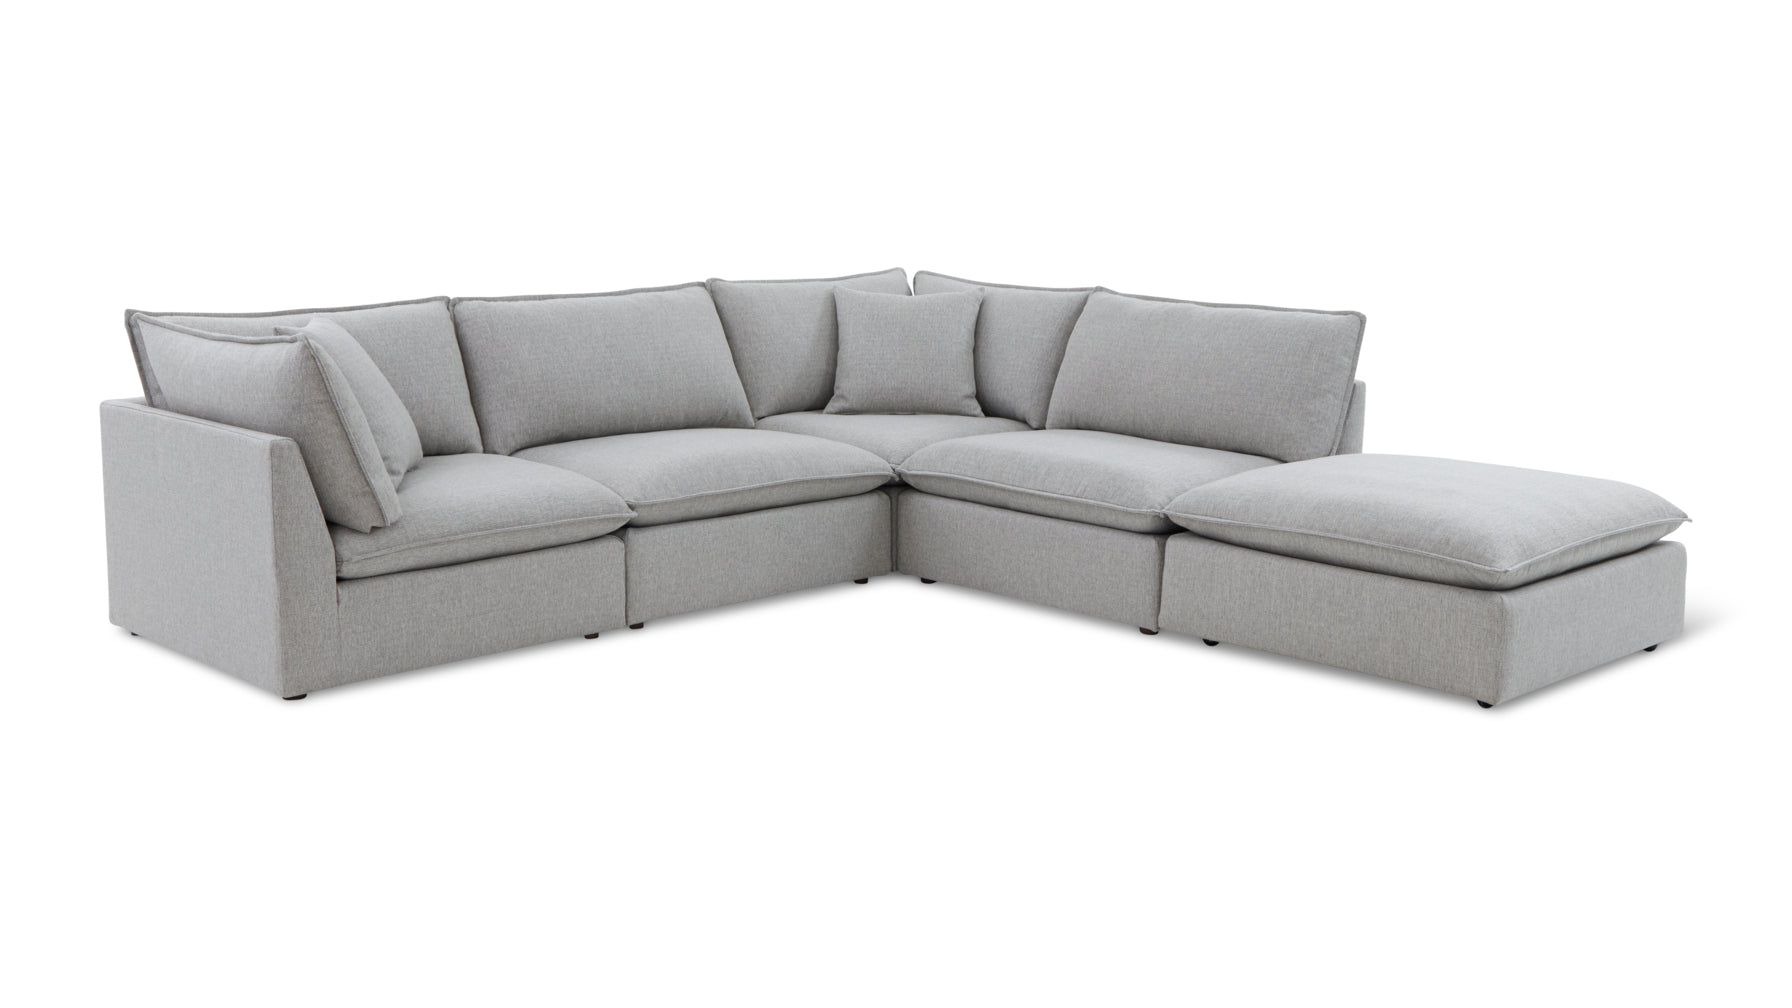 Chill Time 5-Piece Modular Sectional, Heather - Image 2